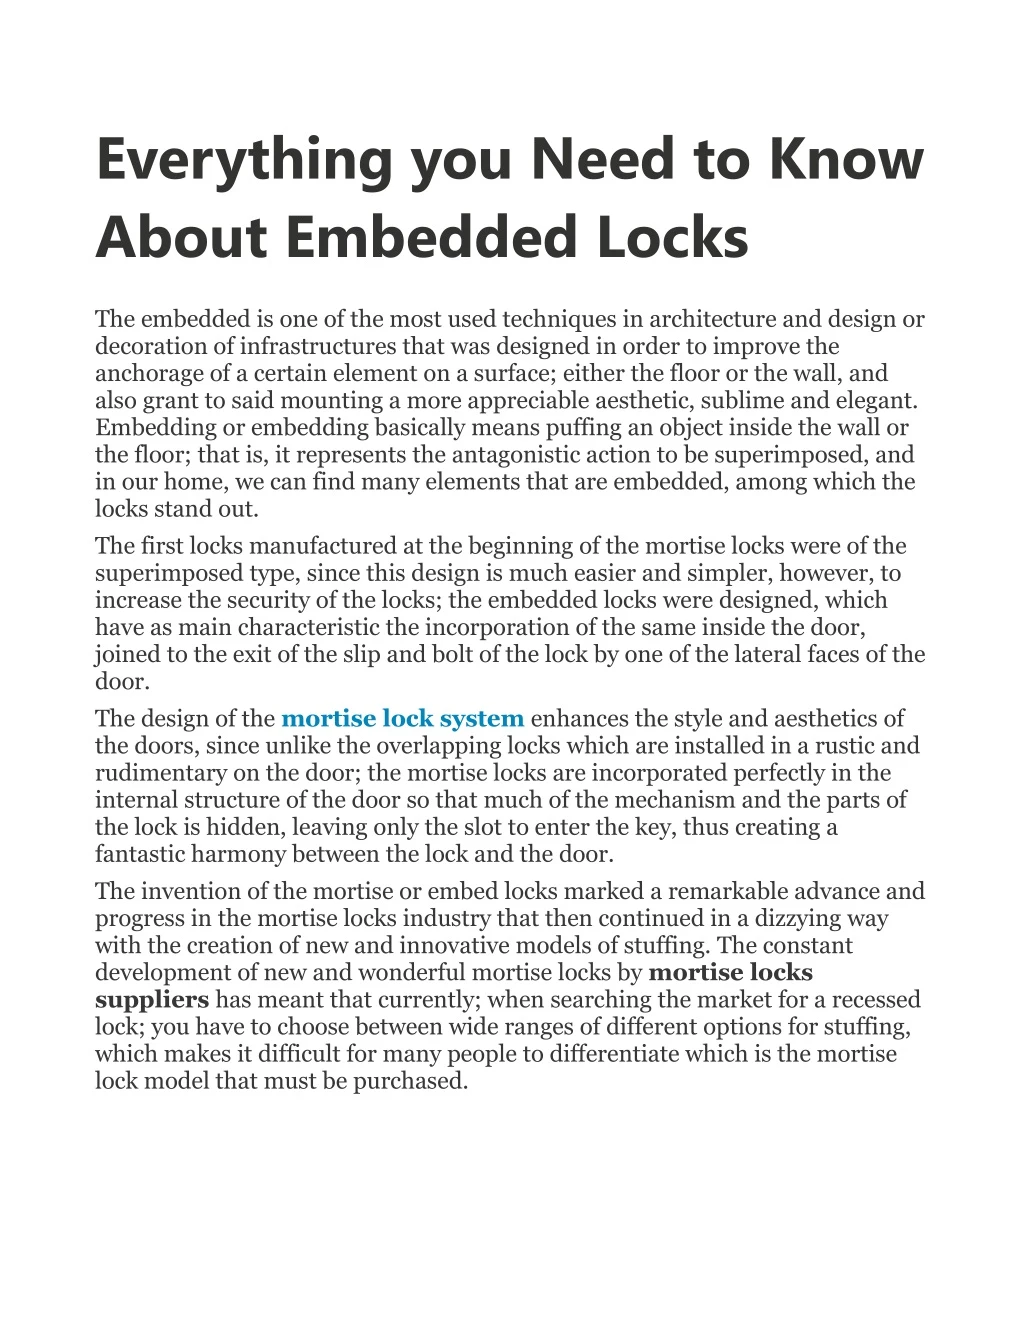 everything you need to know about embedded locks